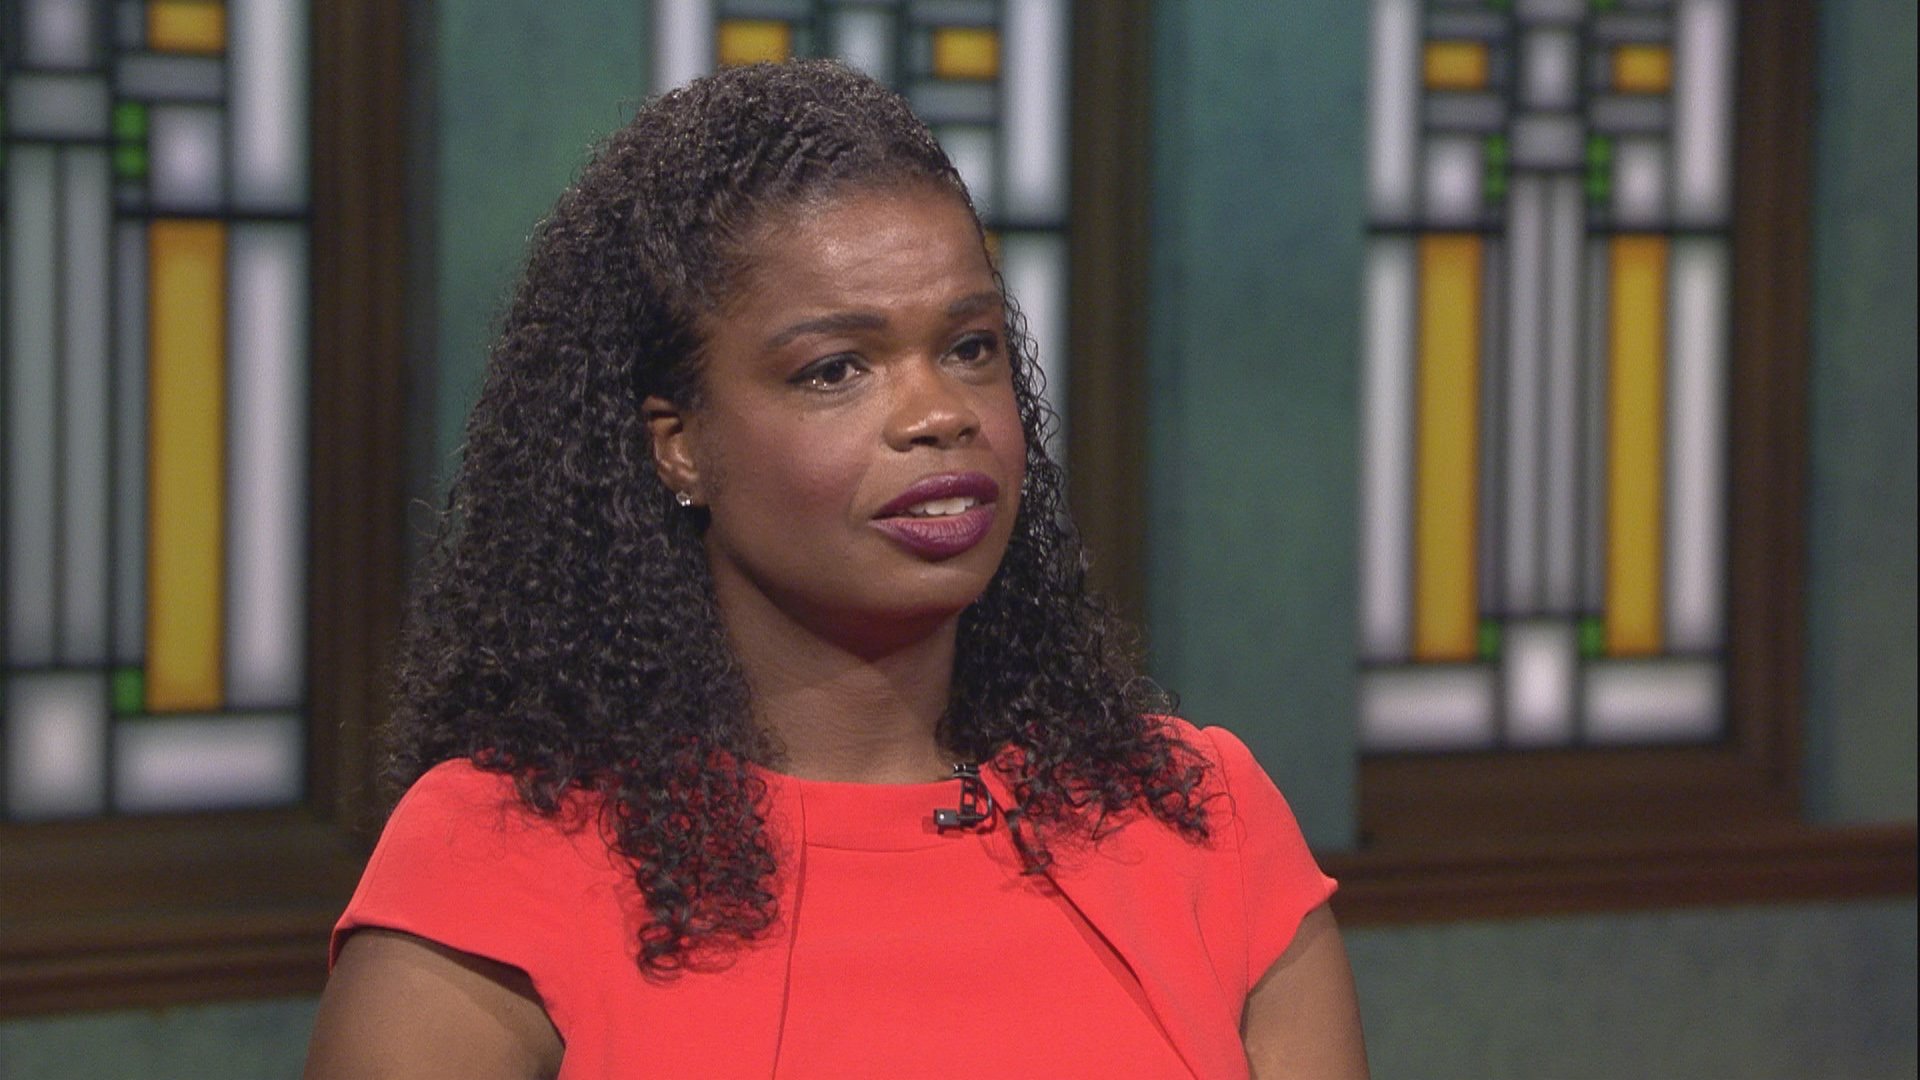 Cook County State’s Attorney Kim Foxx appears on “Chicago Tonight” on Sept. 17, 2019. (WTTW News)